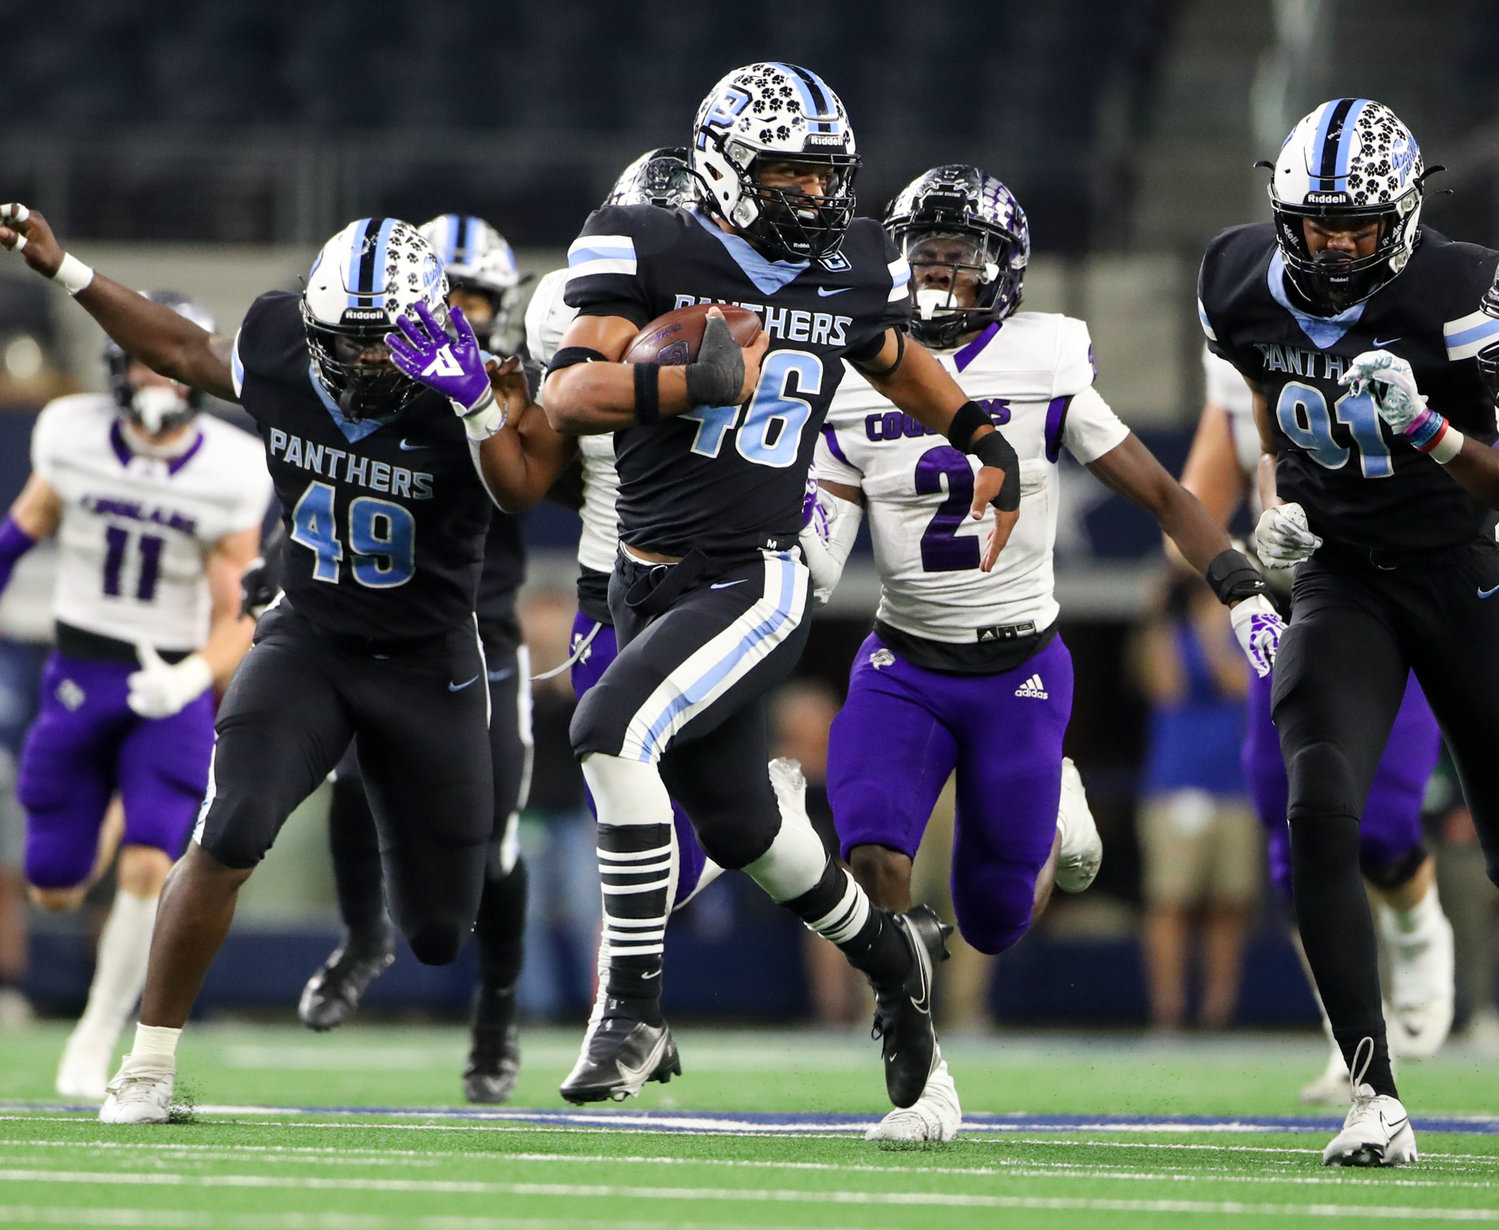 Paetow Panthers linebacker Alex Kilgore (46) returns a fumble during the Class 5A Division I state football championship game between Paetow and College Station on December 17, 2021 in Arlington, Texas.